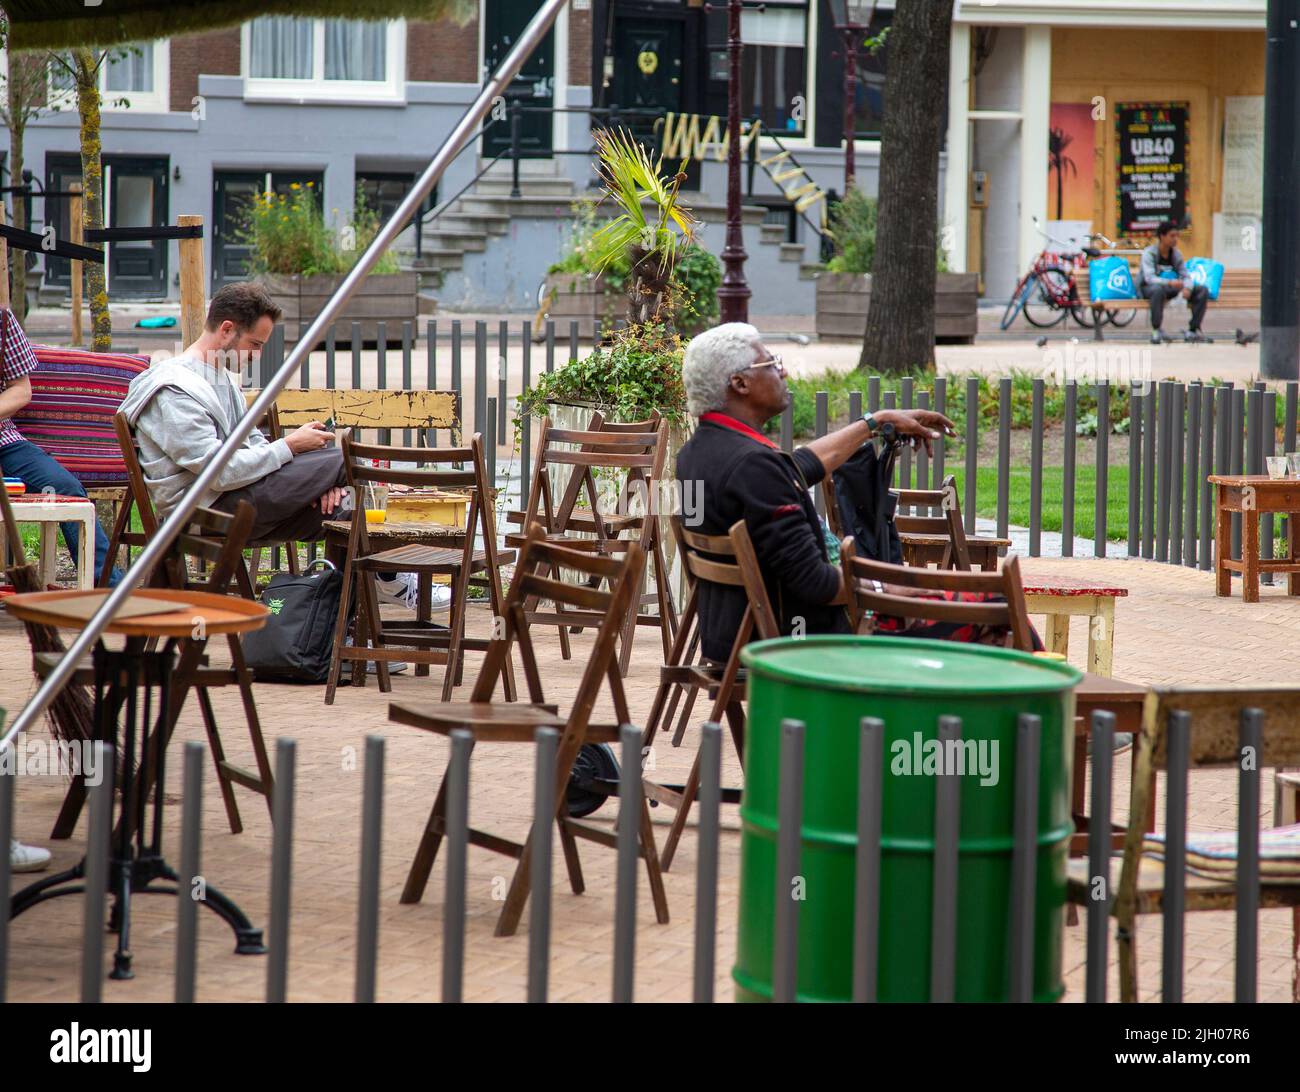 Men sitting at an outdoor cafe in Amsterdam Stock Photo